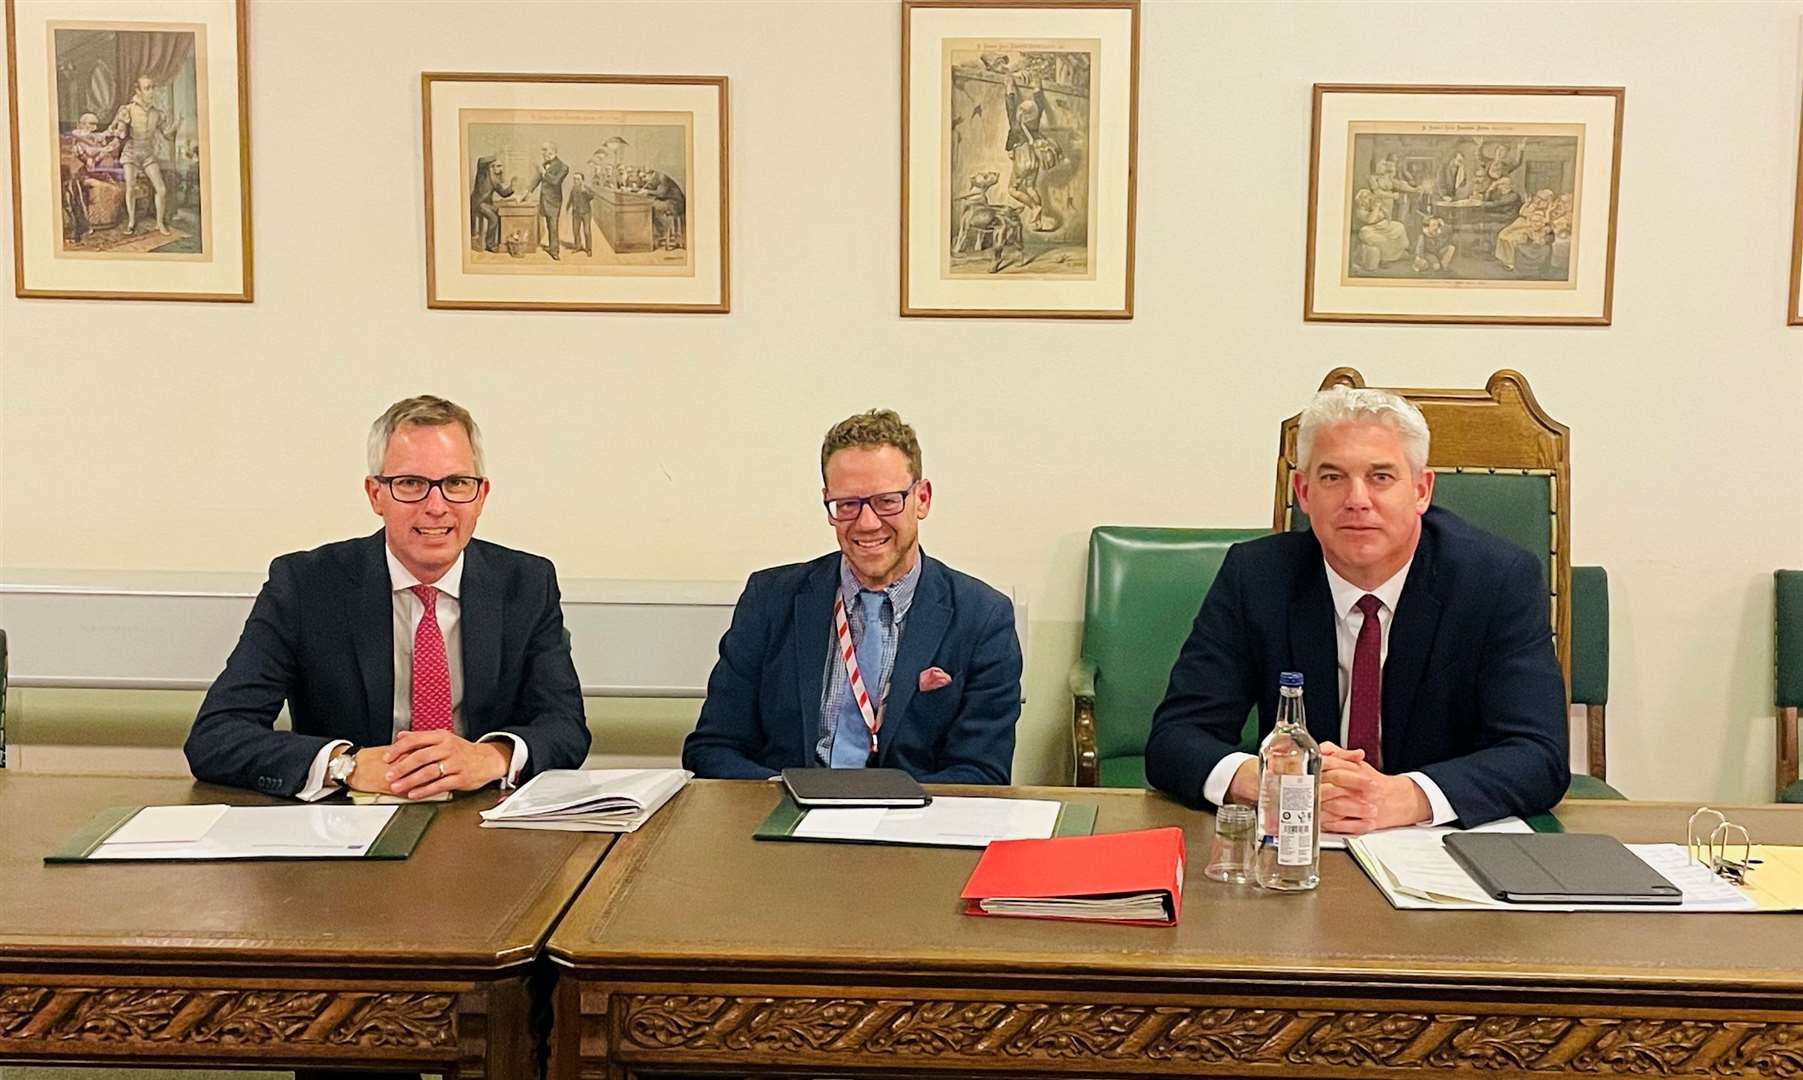 North West Norfolk MP James Wild, Health Secretary Steve Barclay MP and Lord Markham, the Health Minister leading the New Hospitals Programme, meeting to finalise the announcement.